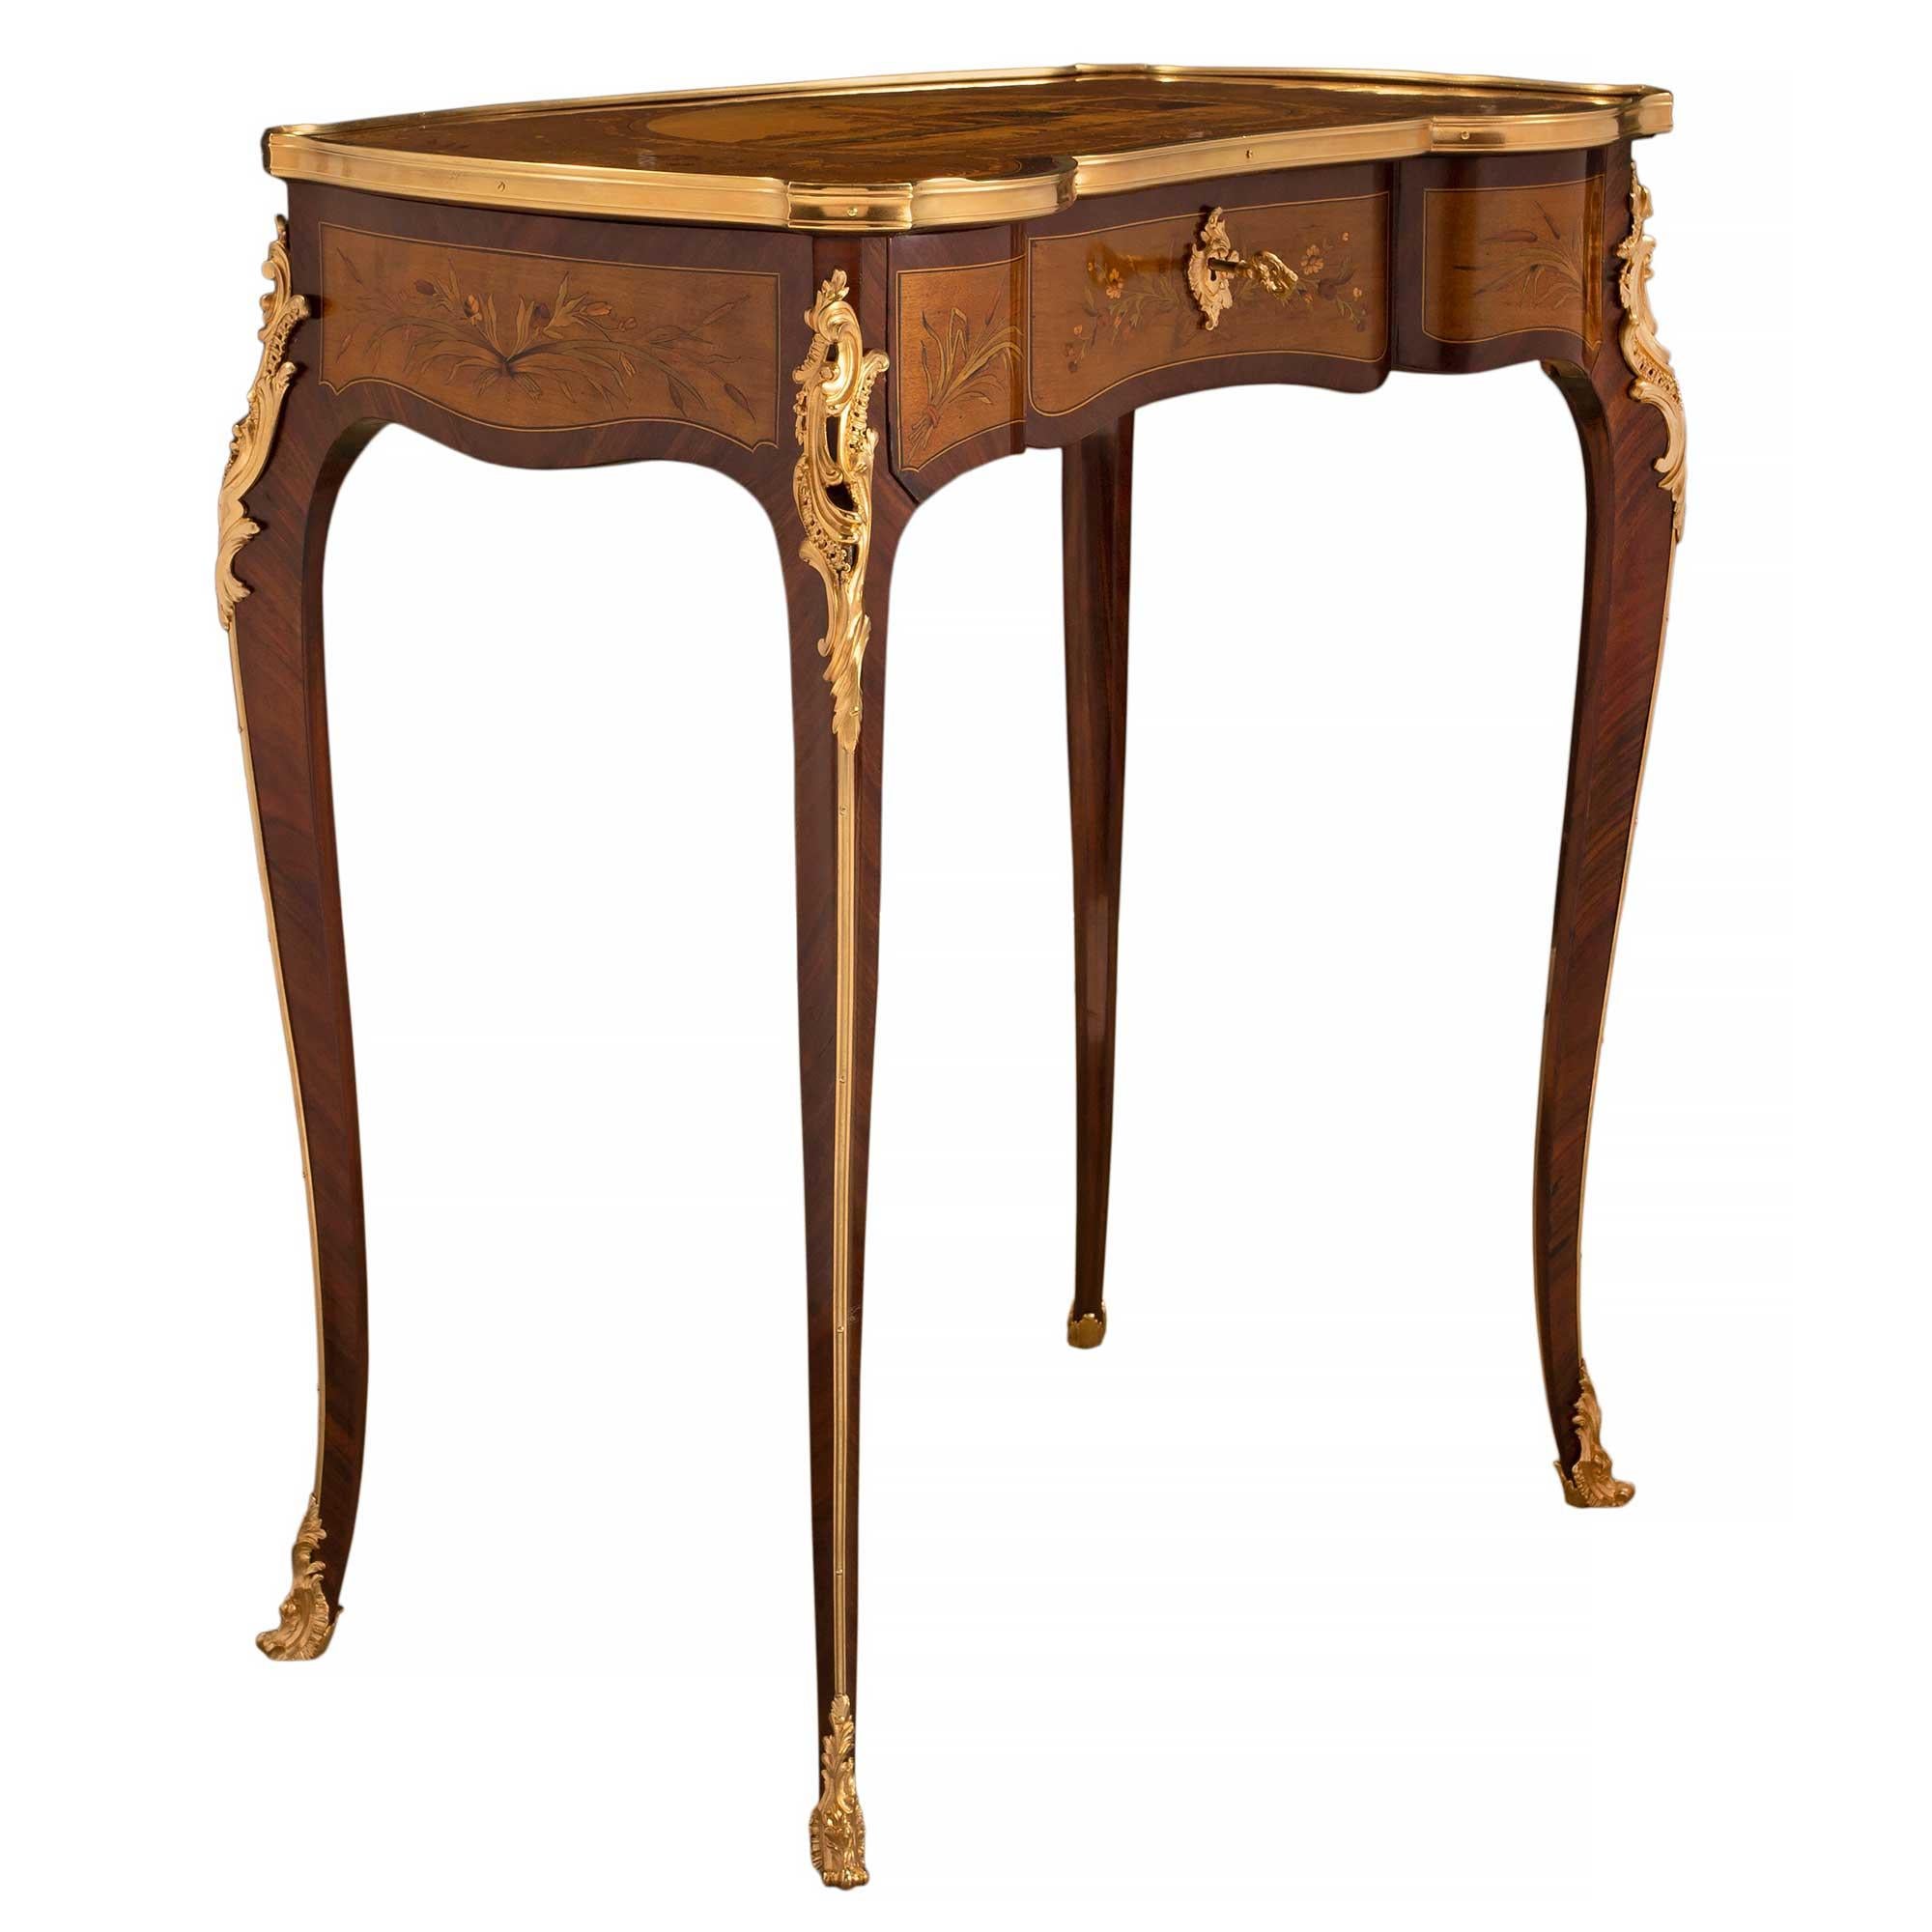 French 19th Century Louis XV Style Kingwood, Tulipwood and Ormolu Dressing Table In Good Condition For Sale In West Palm Beach, FL